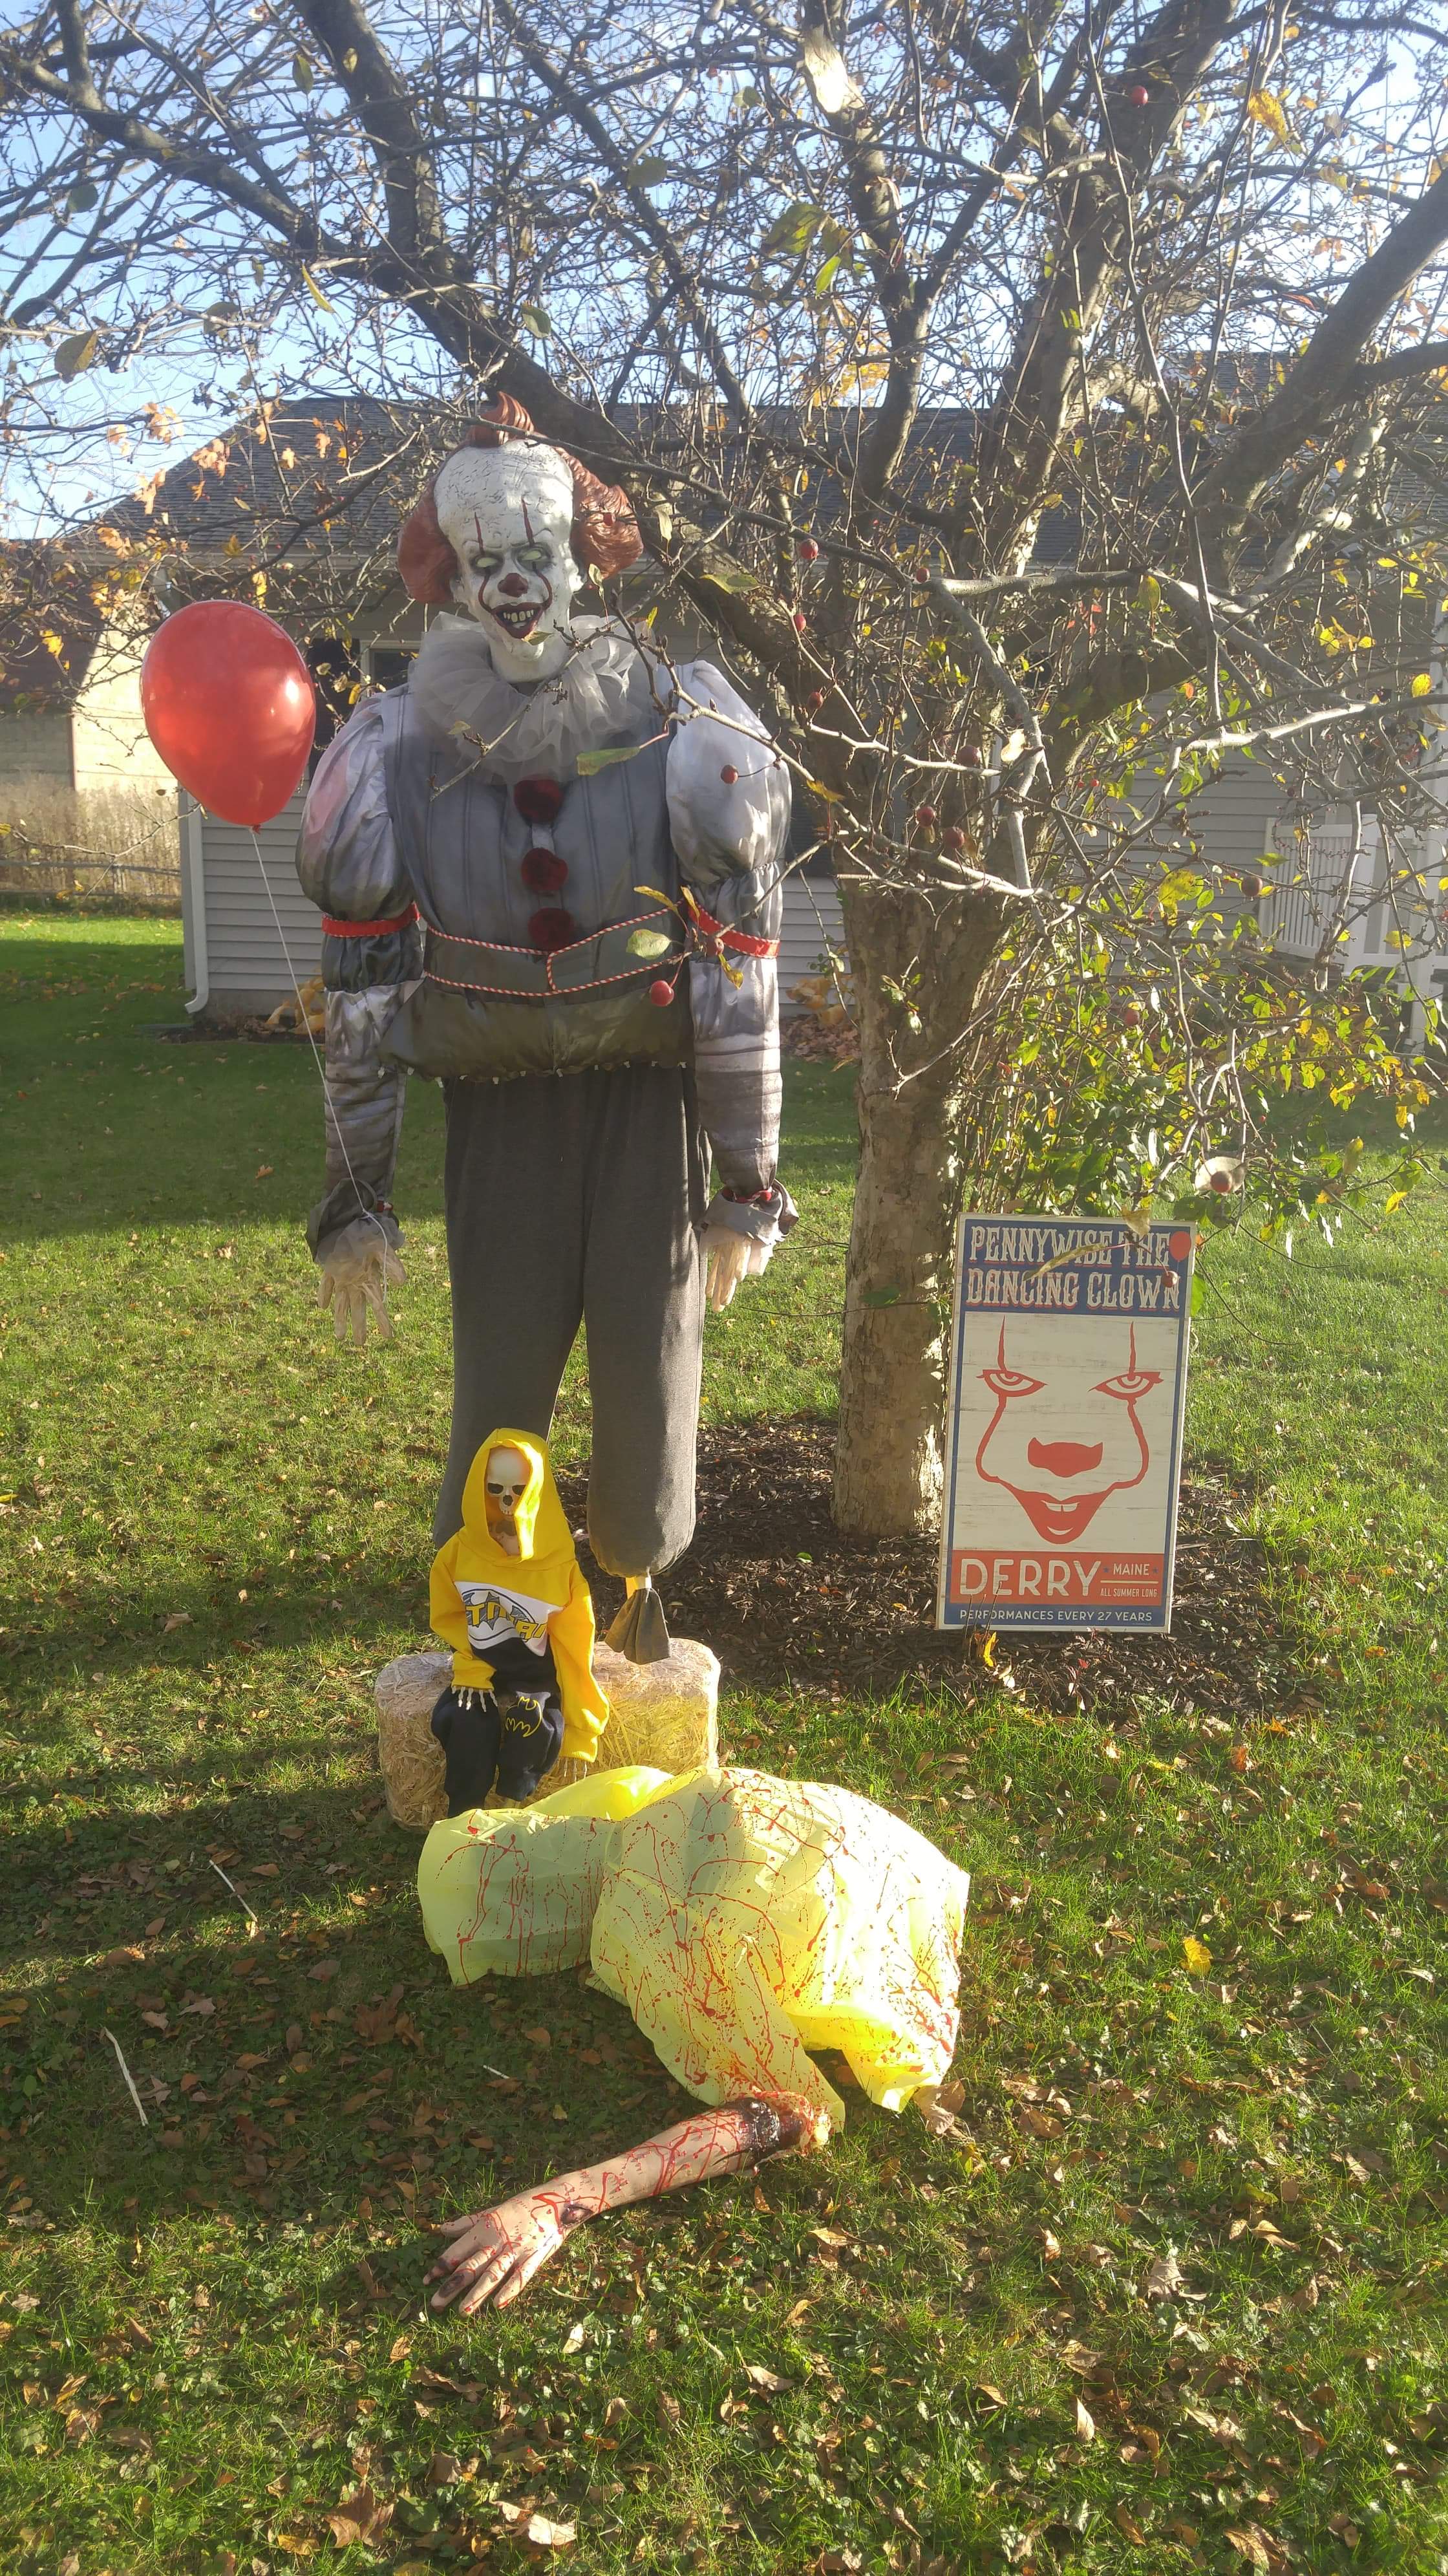 Sherburne Scarecrow - Pennywise the clown in daylight